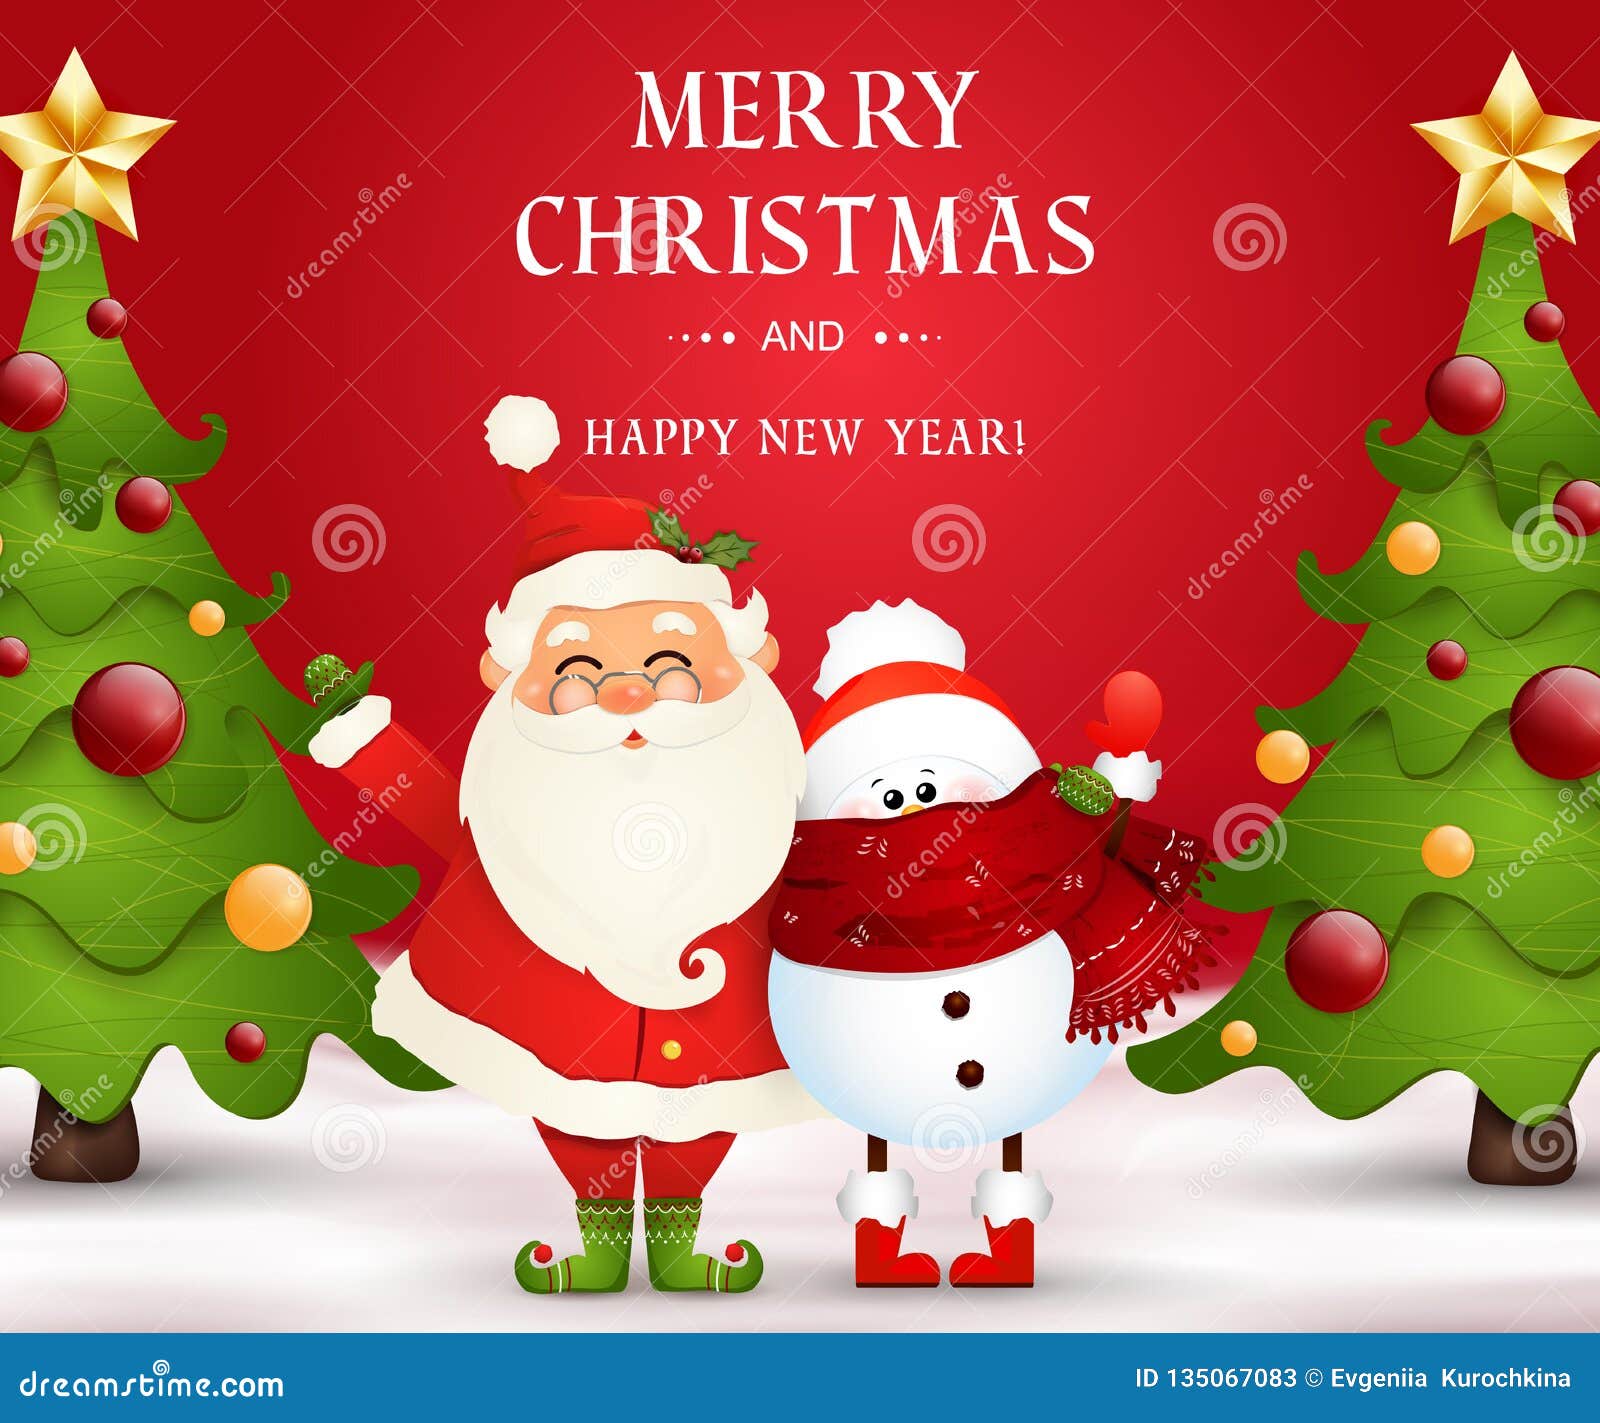 Merry Christmas Happy New Year Funny Santa Claus With